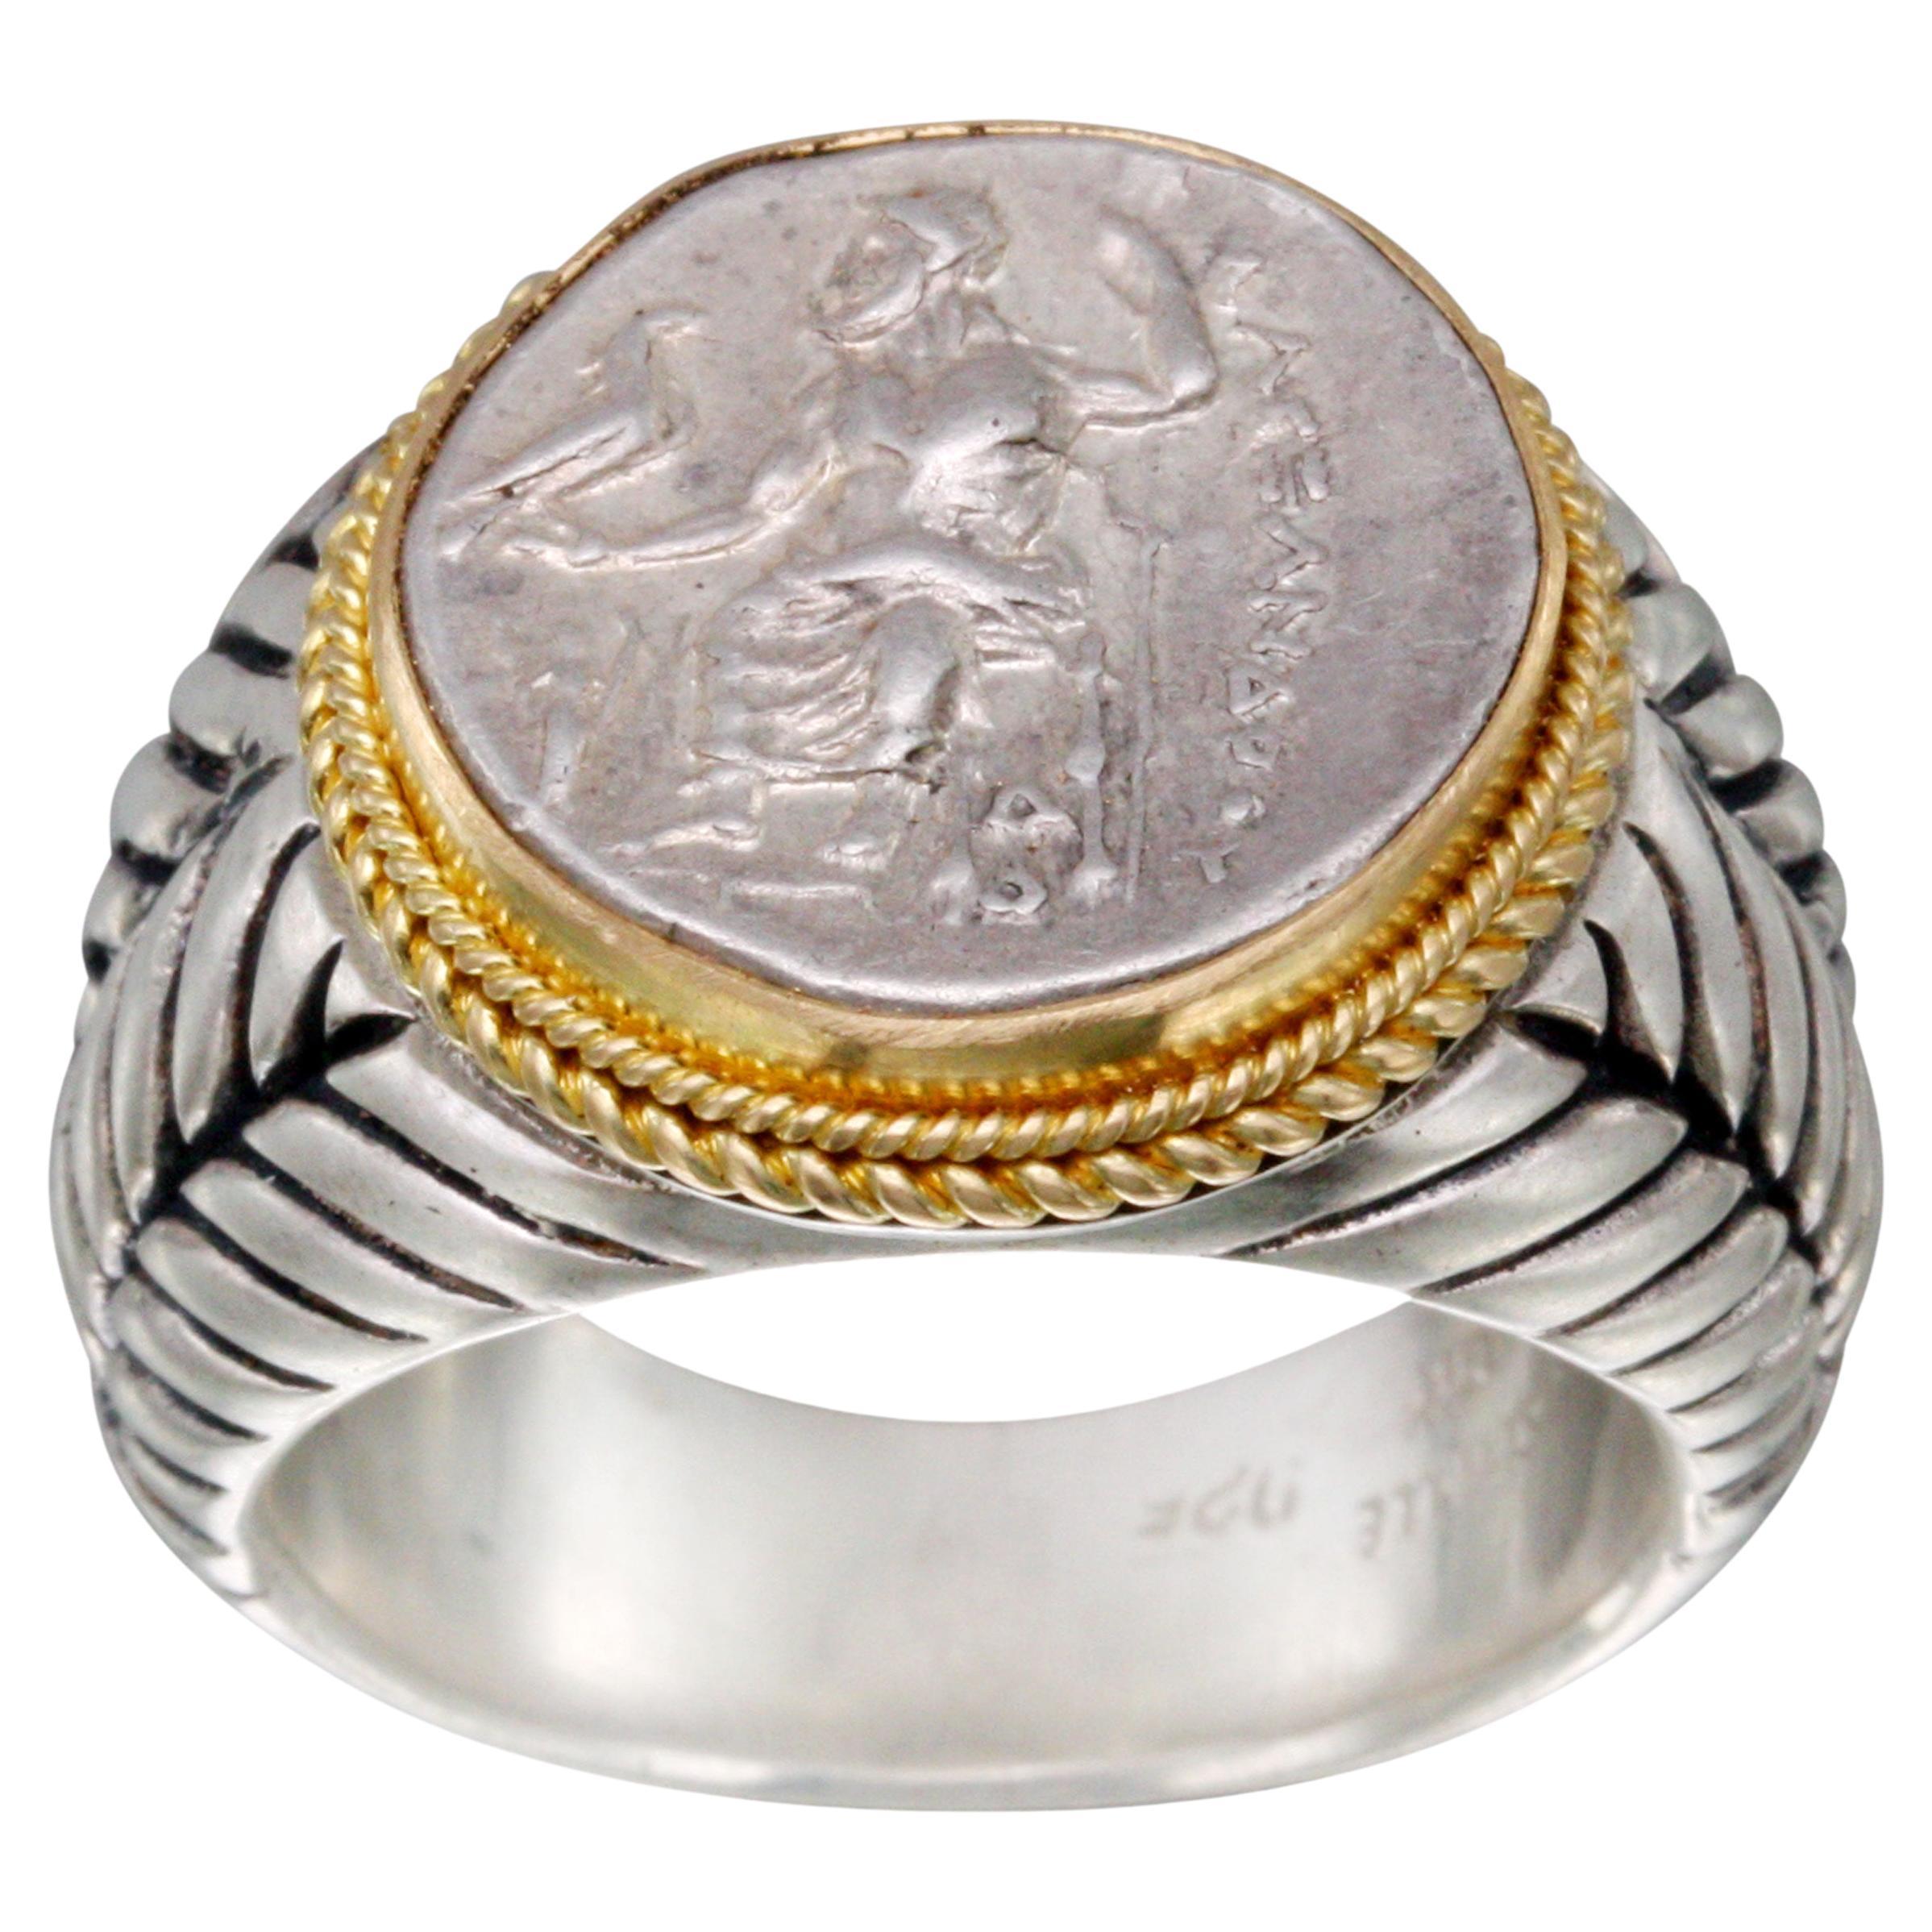 Ancient Greek 4th Century BC Alexander the Great Zeus Coin Gold Silver Mens Ring